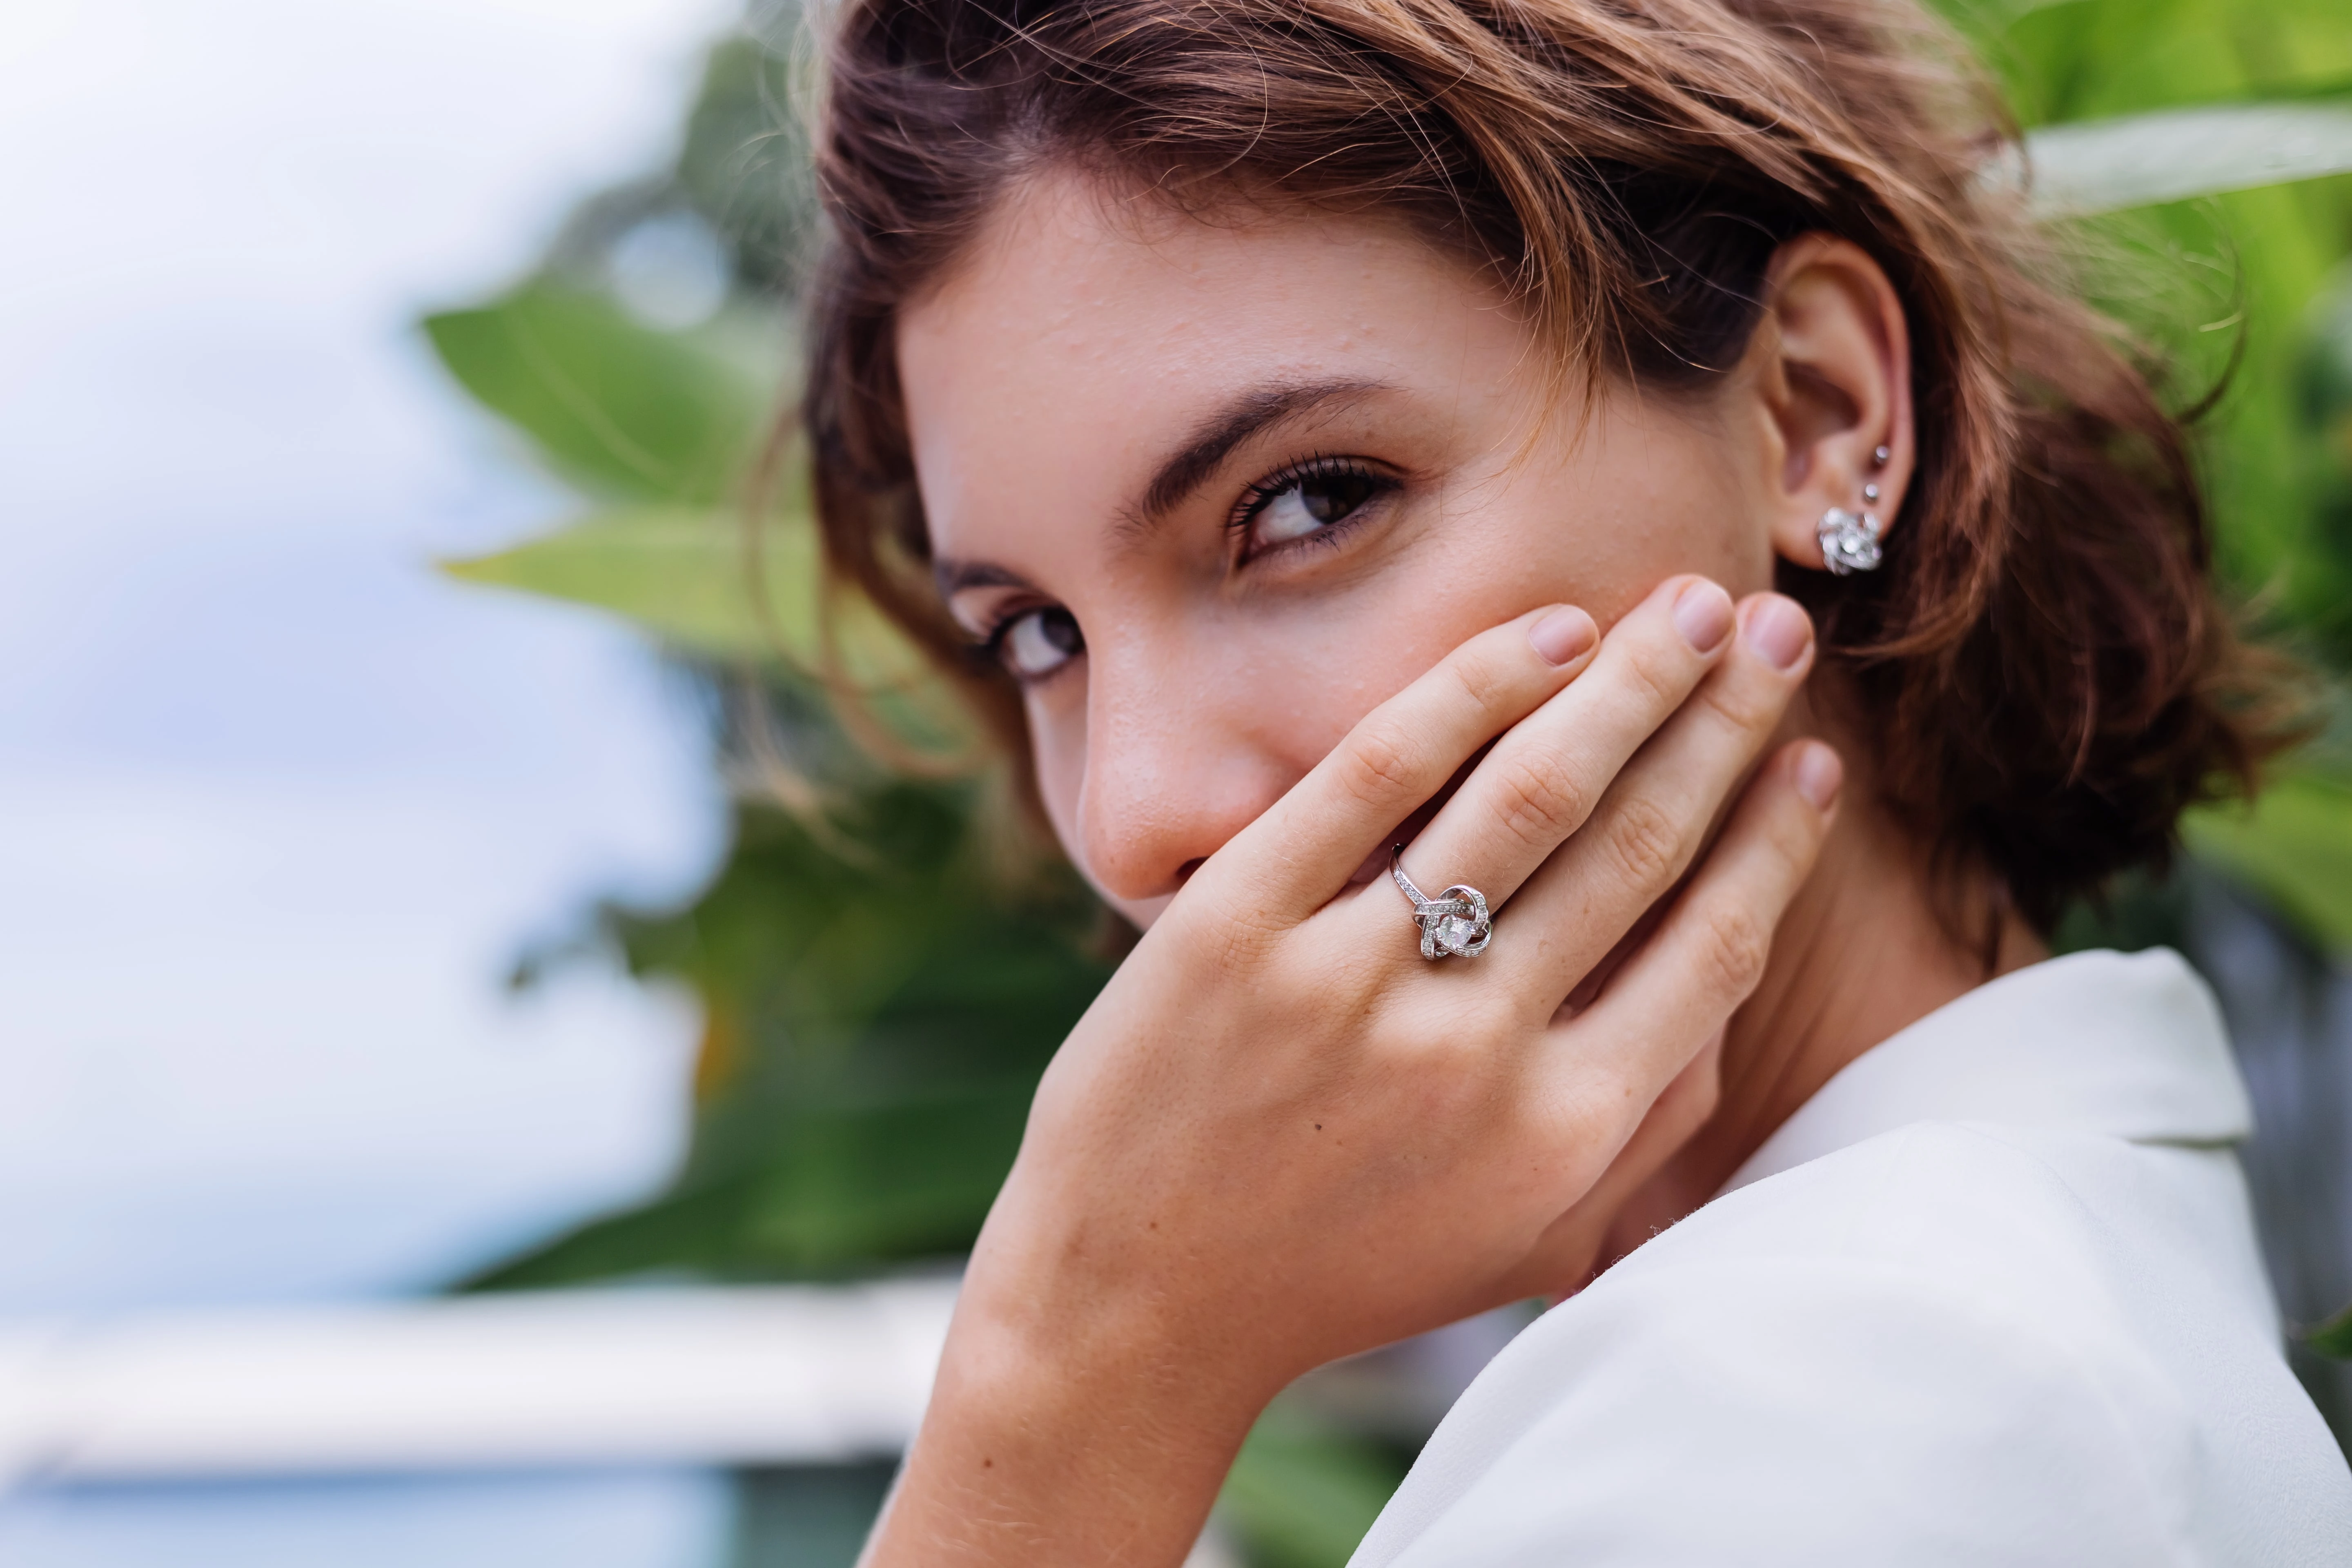 A woman who combined her earrings and ring in the same style